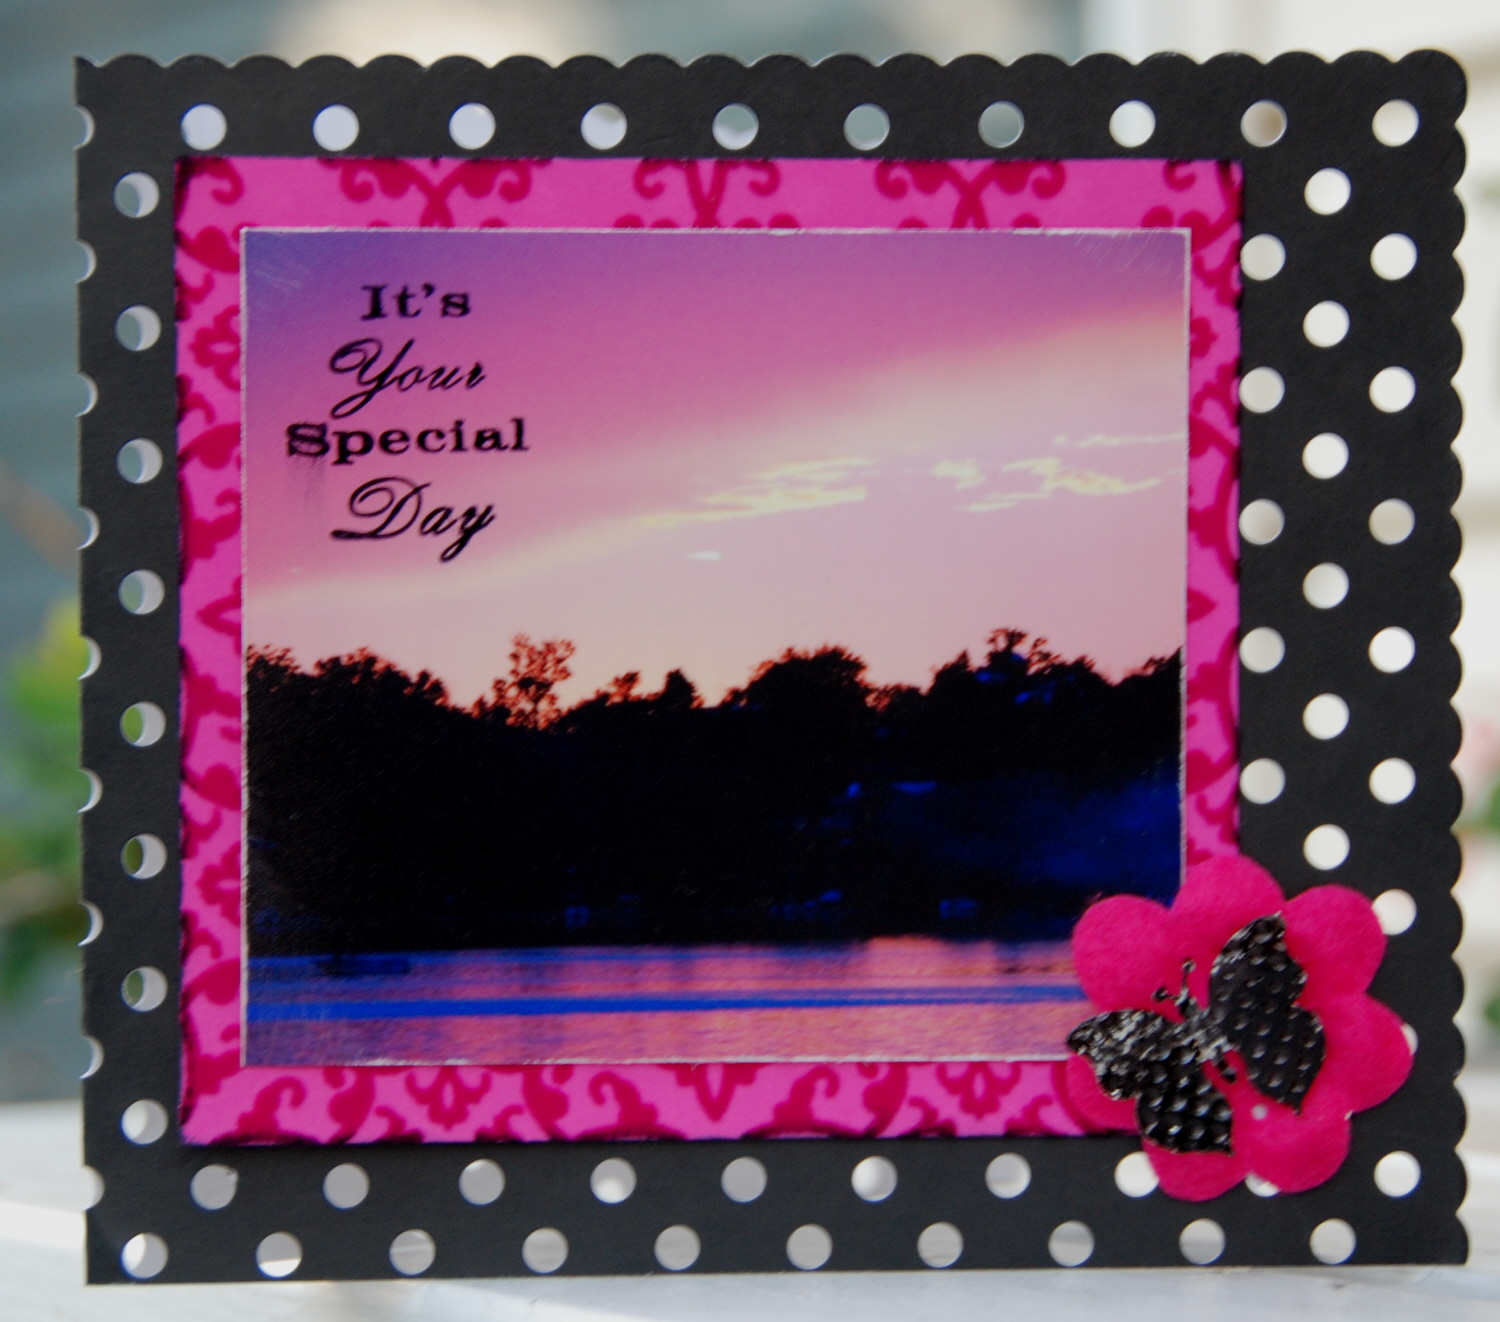 [it's+your+special+day++70.jpg]